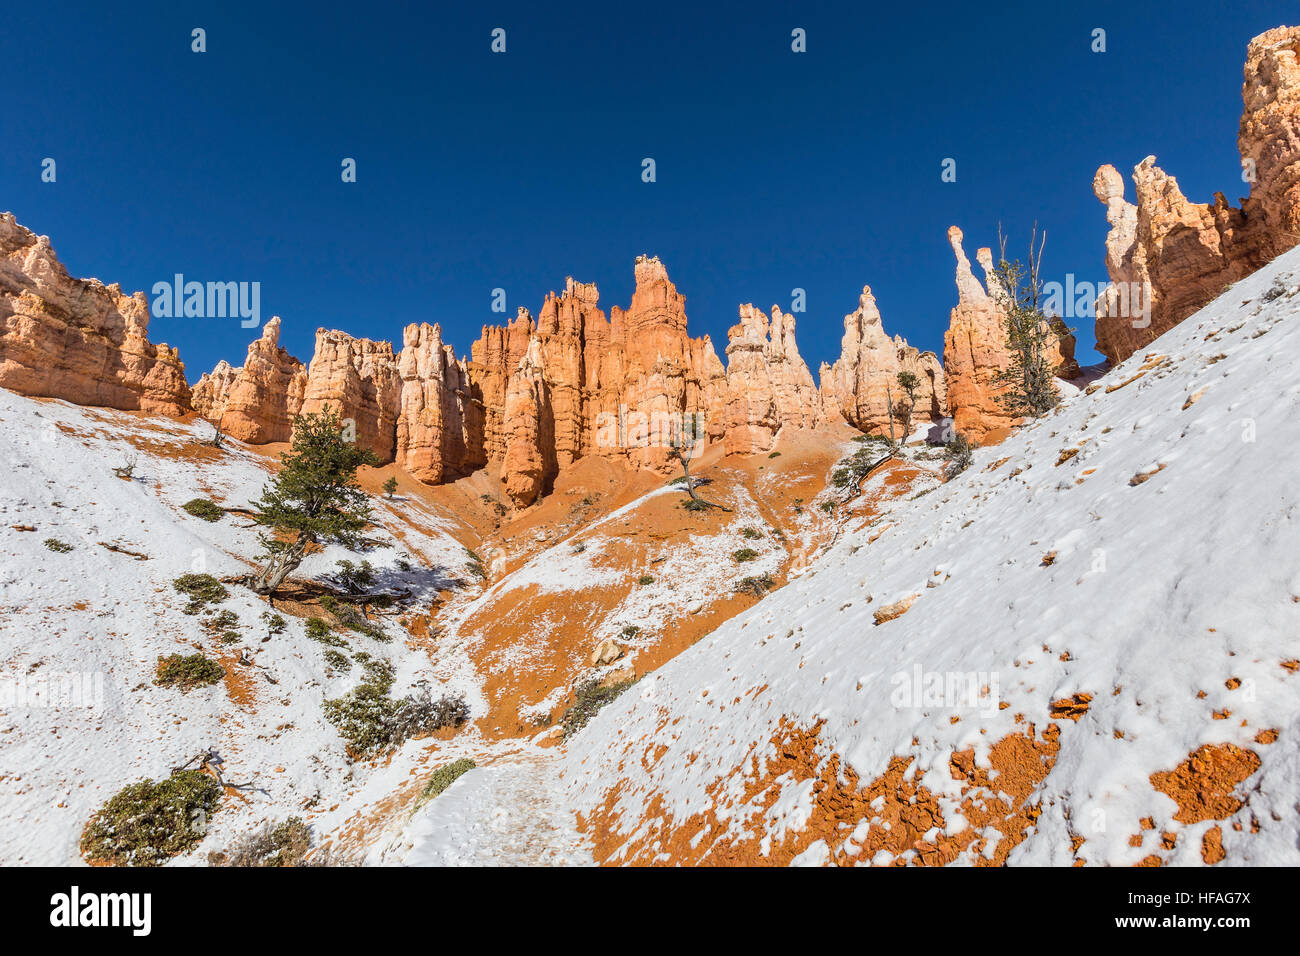 Hoodoo towers and snow at Bryce Canyon National Park in Southern Utah. Stock Photo